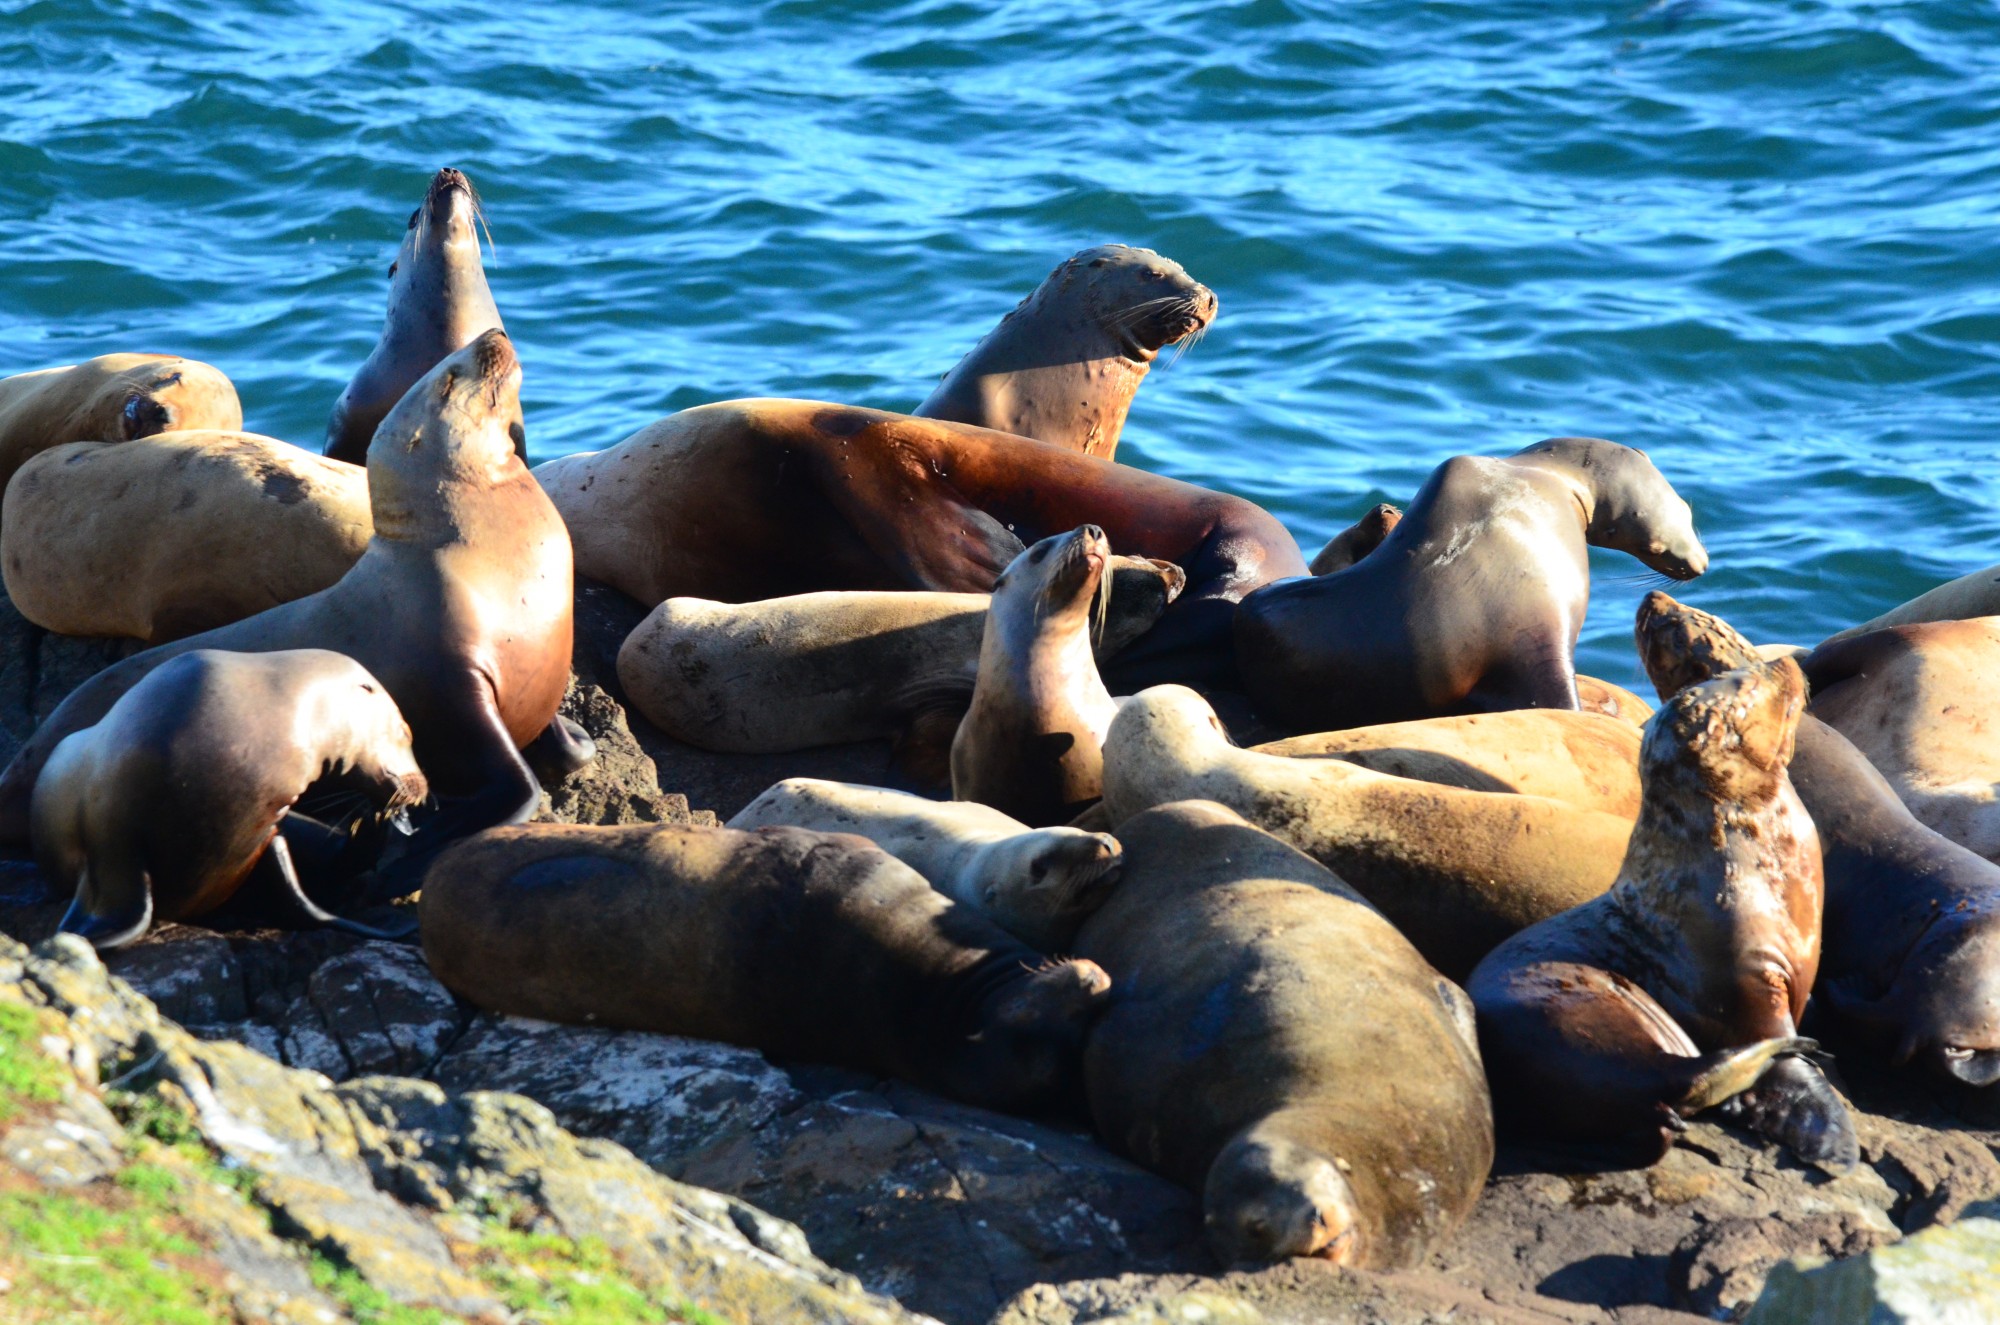 Sea lions looking shabby, but just molting